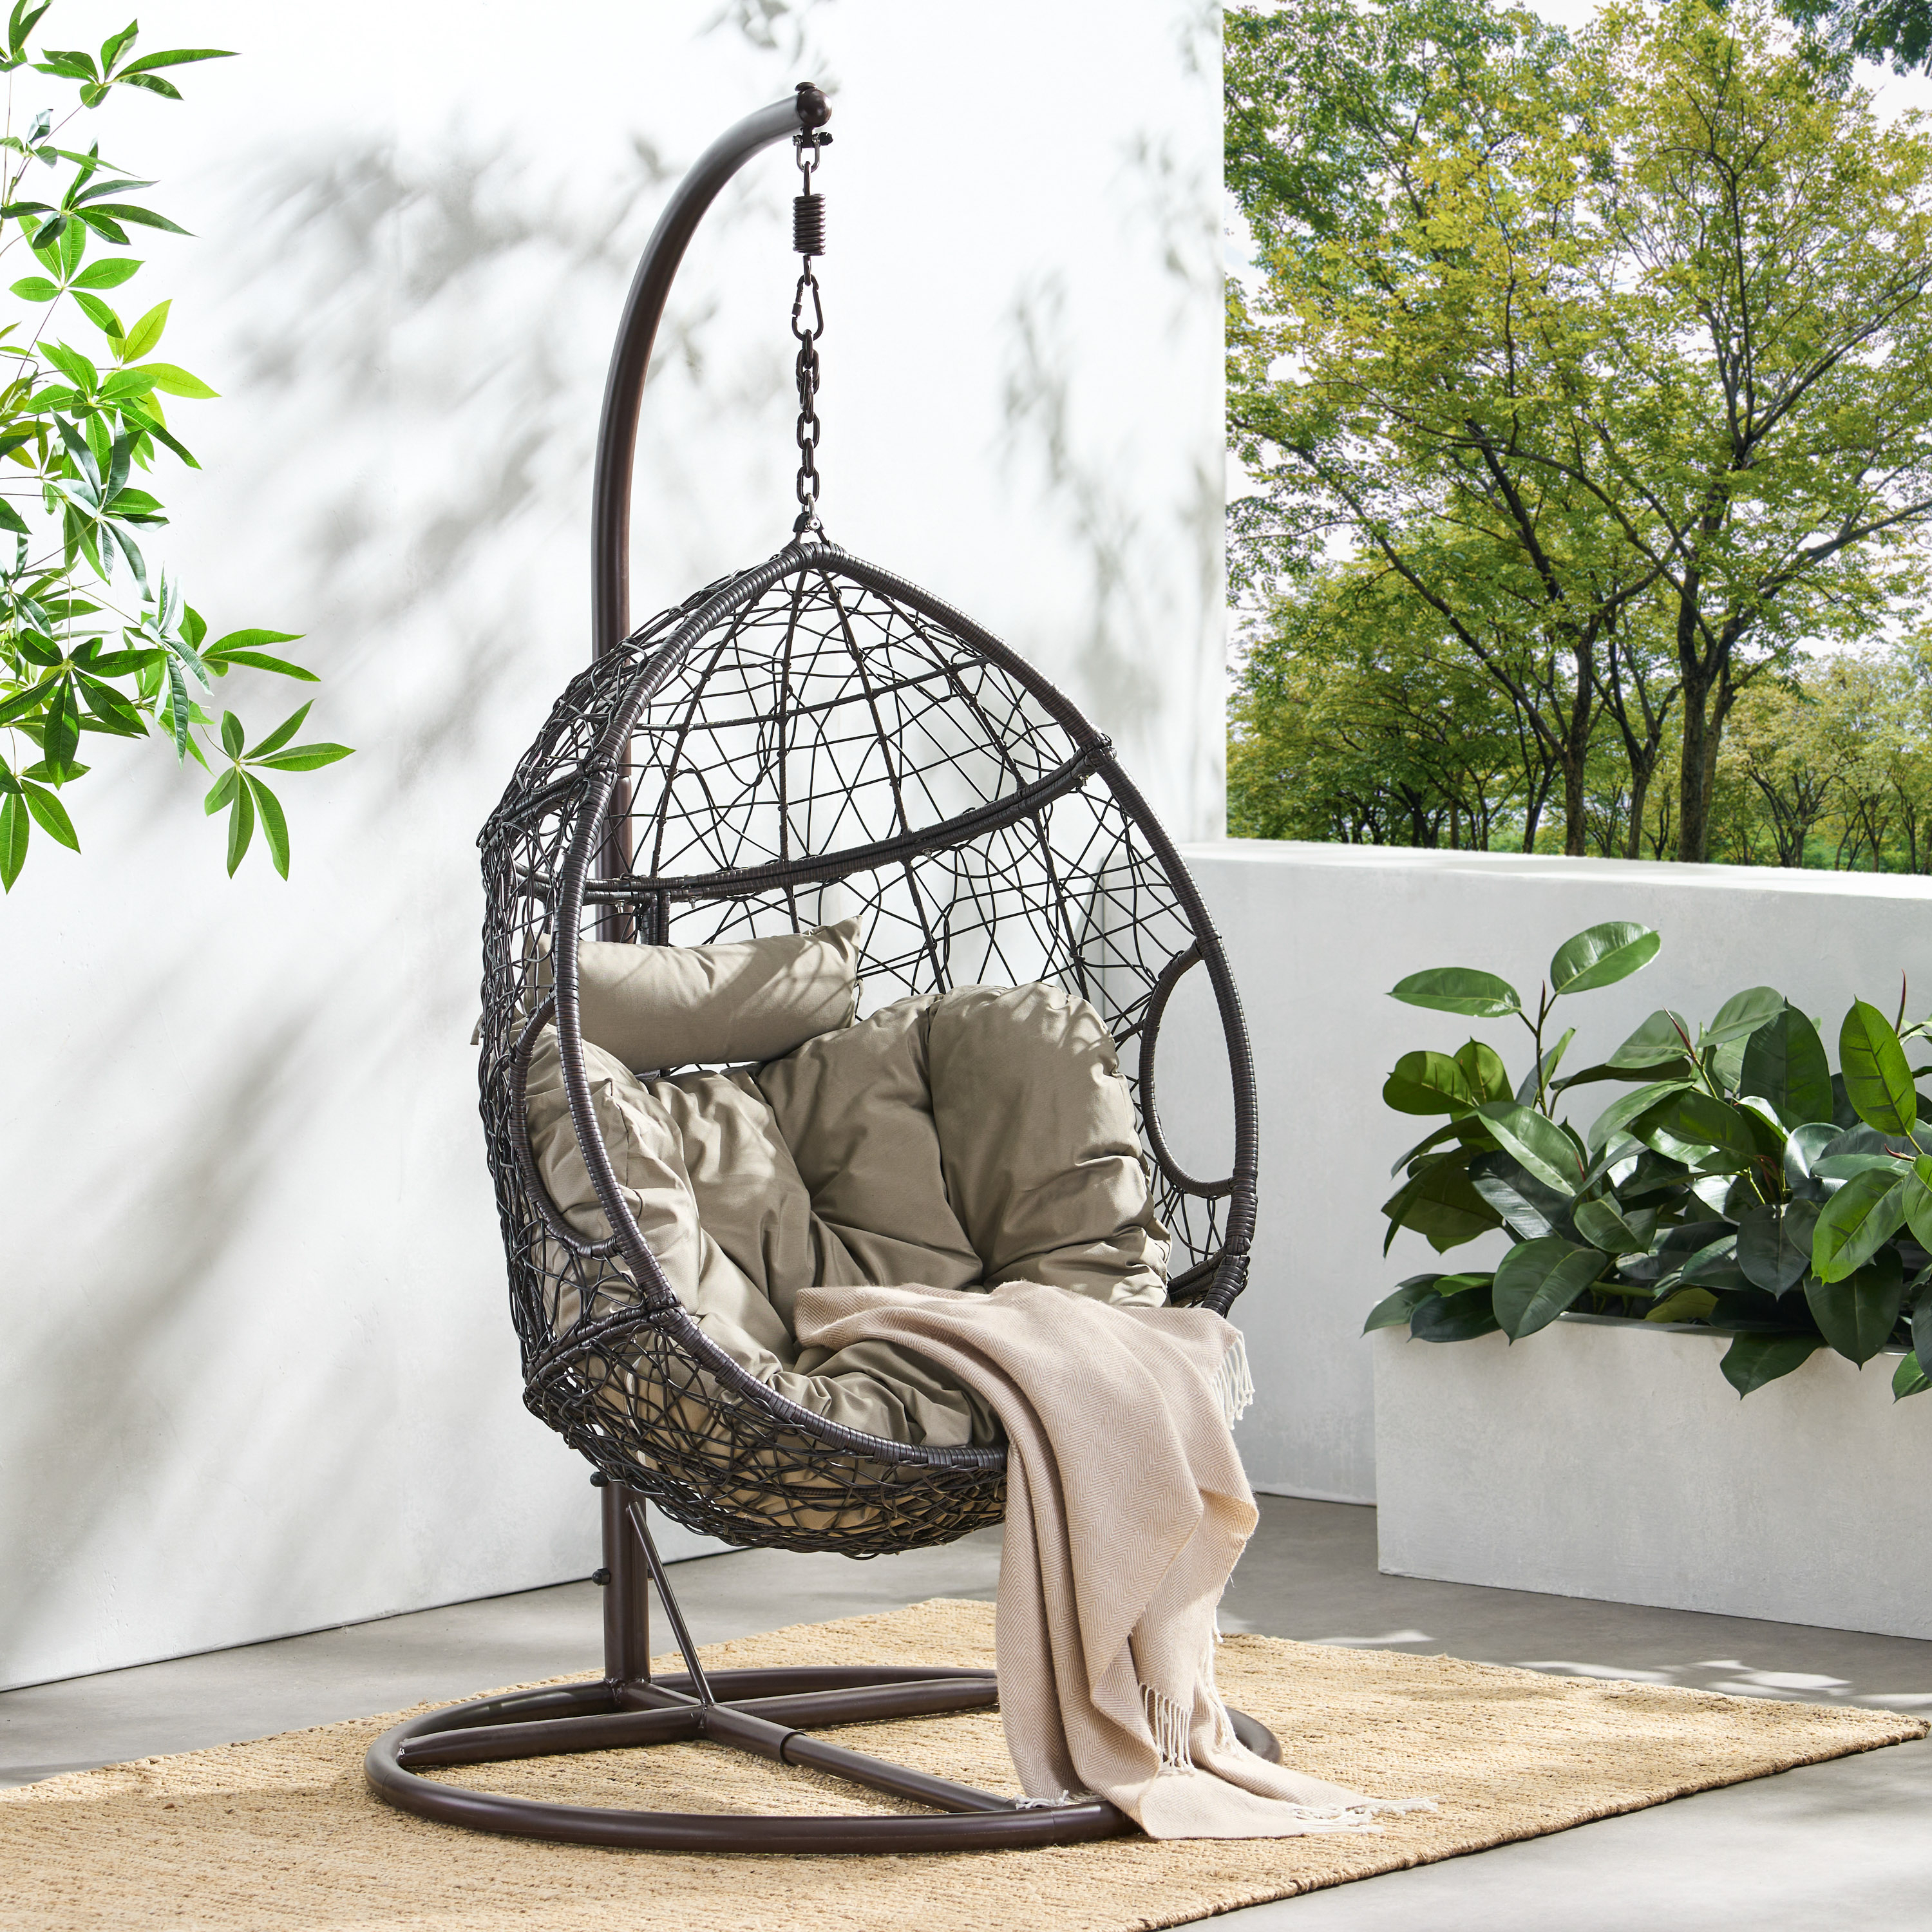 Kyle Outdoor Wicker Hanging Basket Chair With Water Resistant Cushions And Base - Multi-brown/Khaki